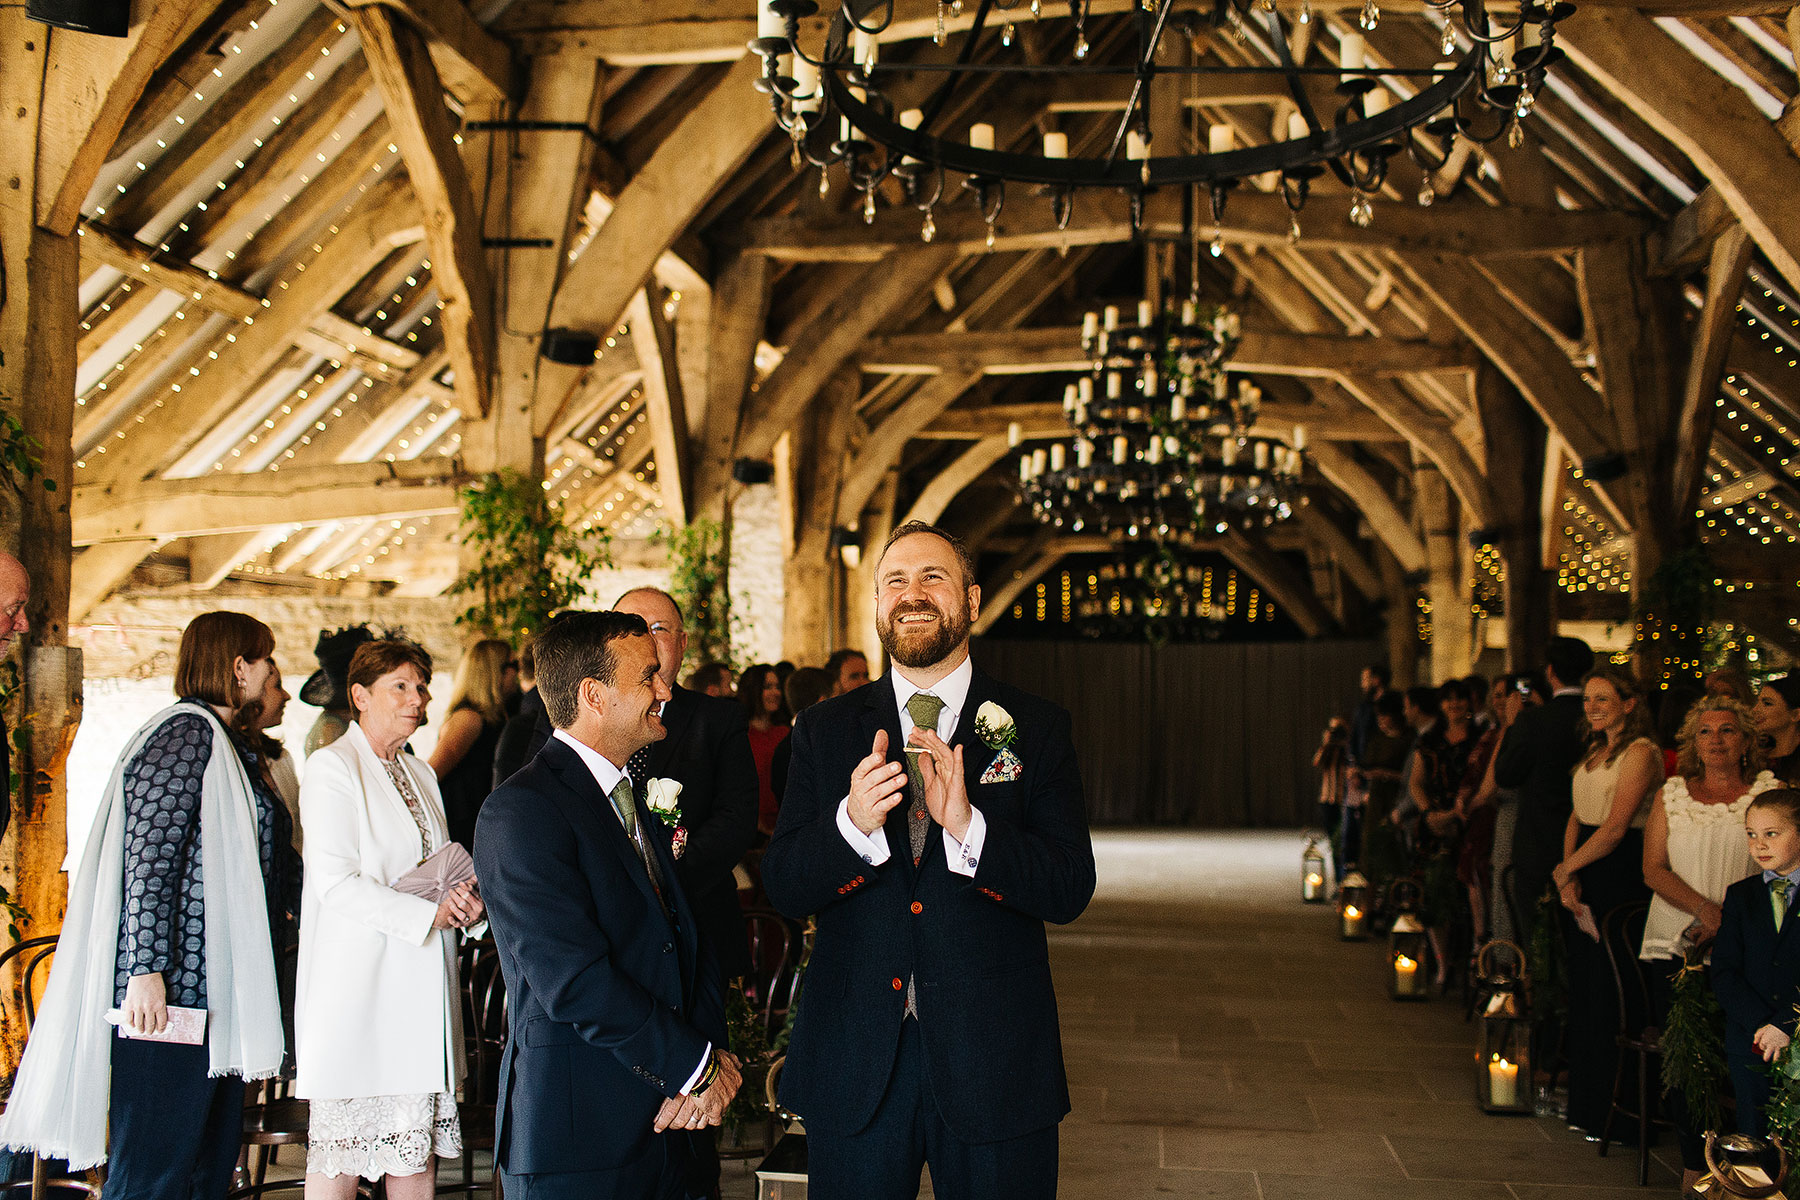 Getting married in the Tithe Barn at Bolton Abbey